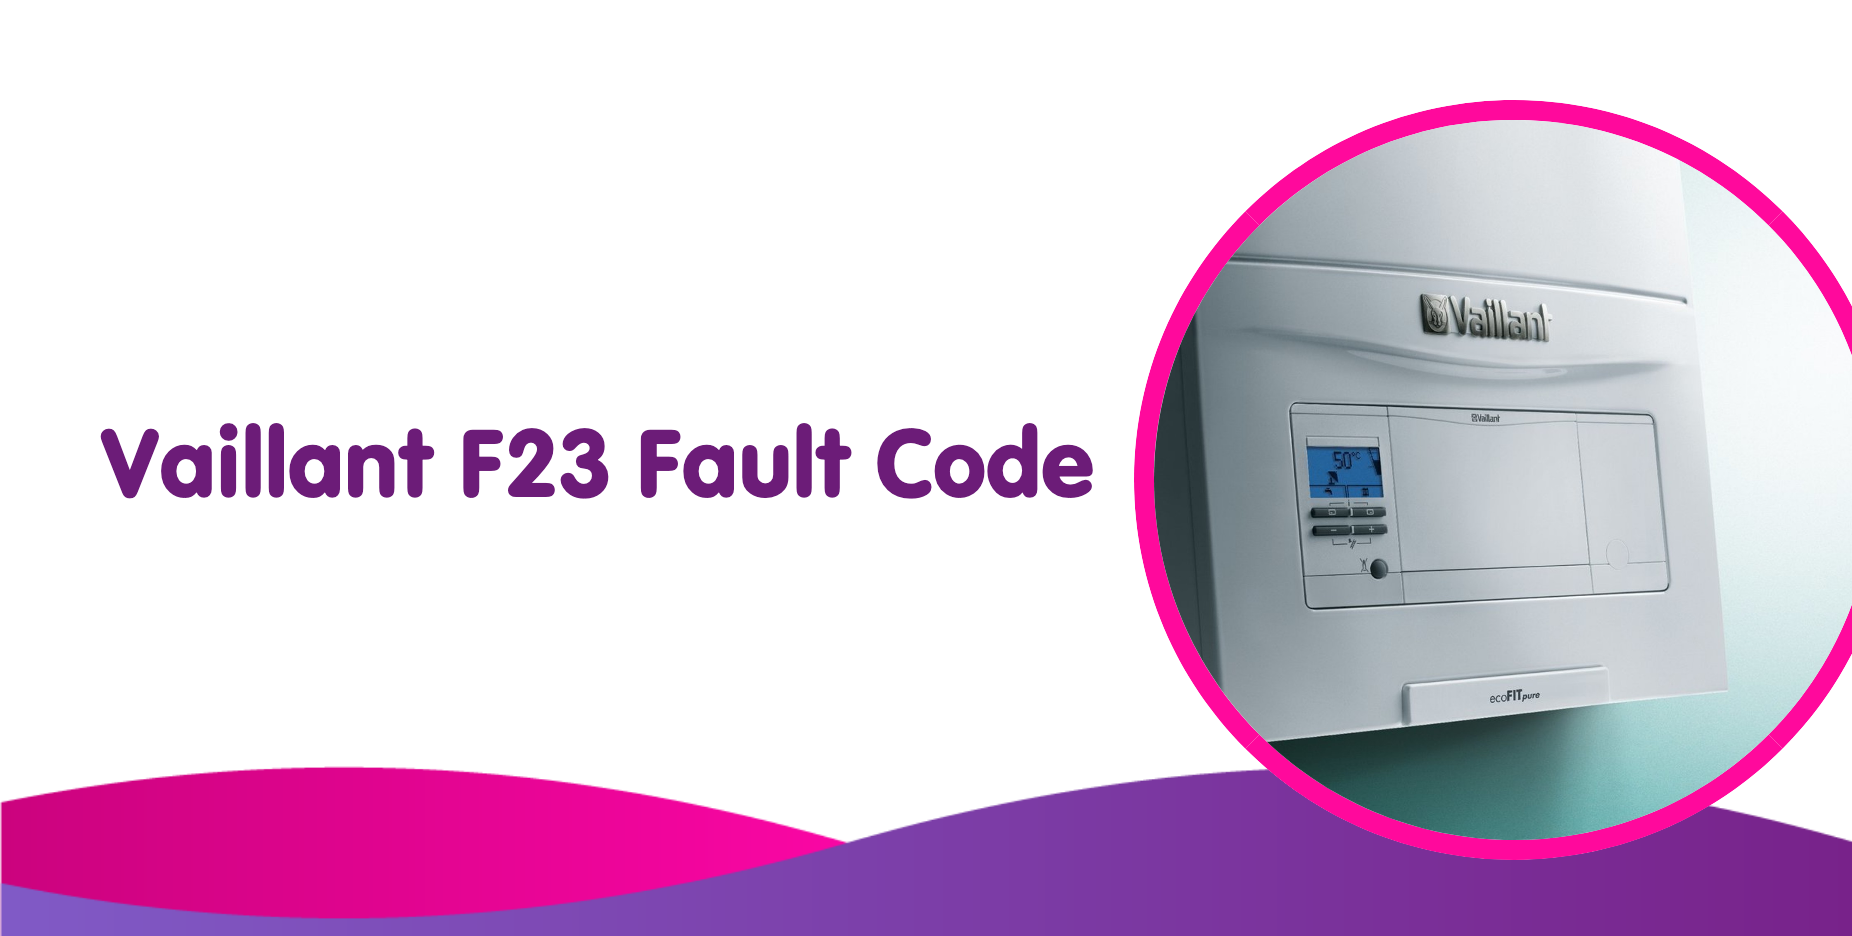 pattern radioactivity Can't read or write Vaillant F23 Fault Code - How To Fix F23 Vaillant Boiler Error Code